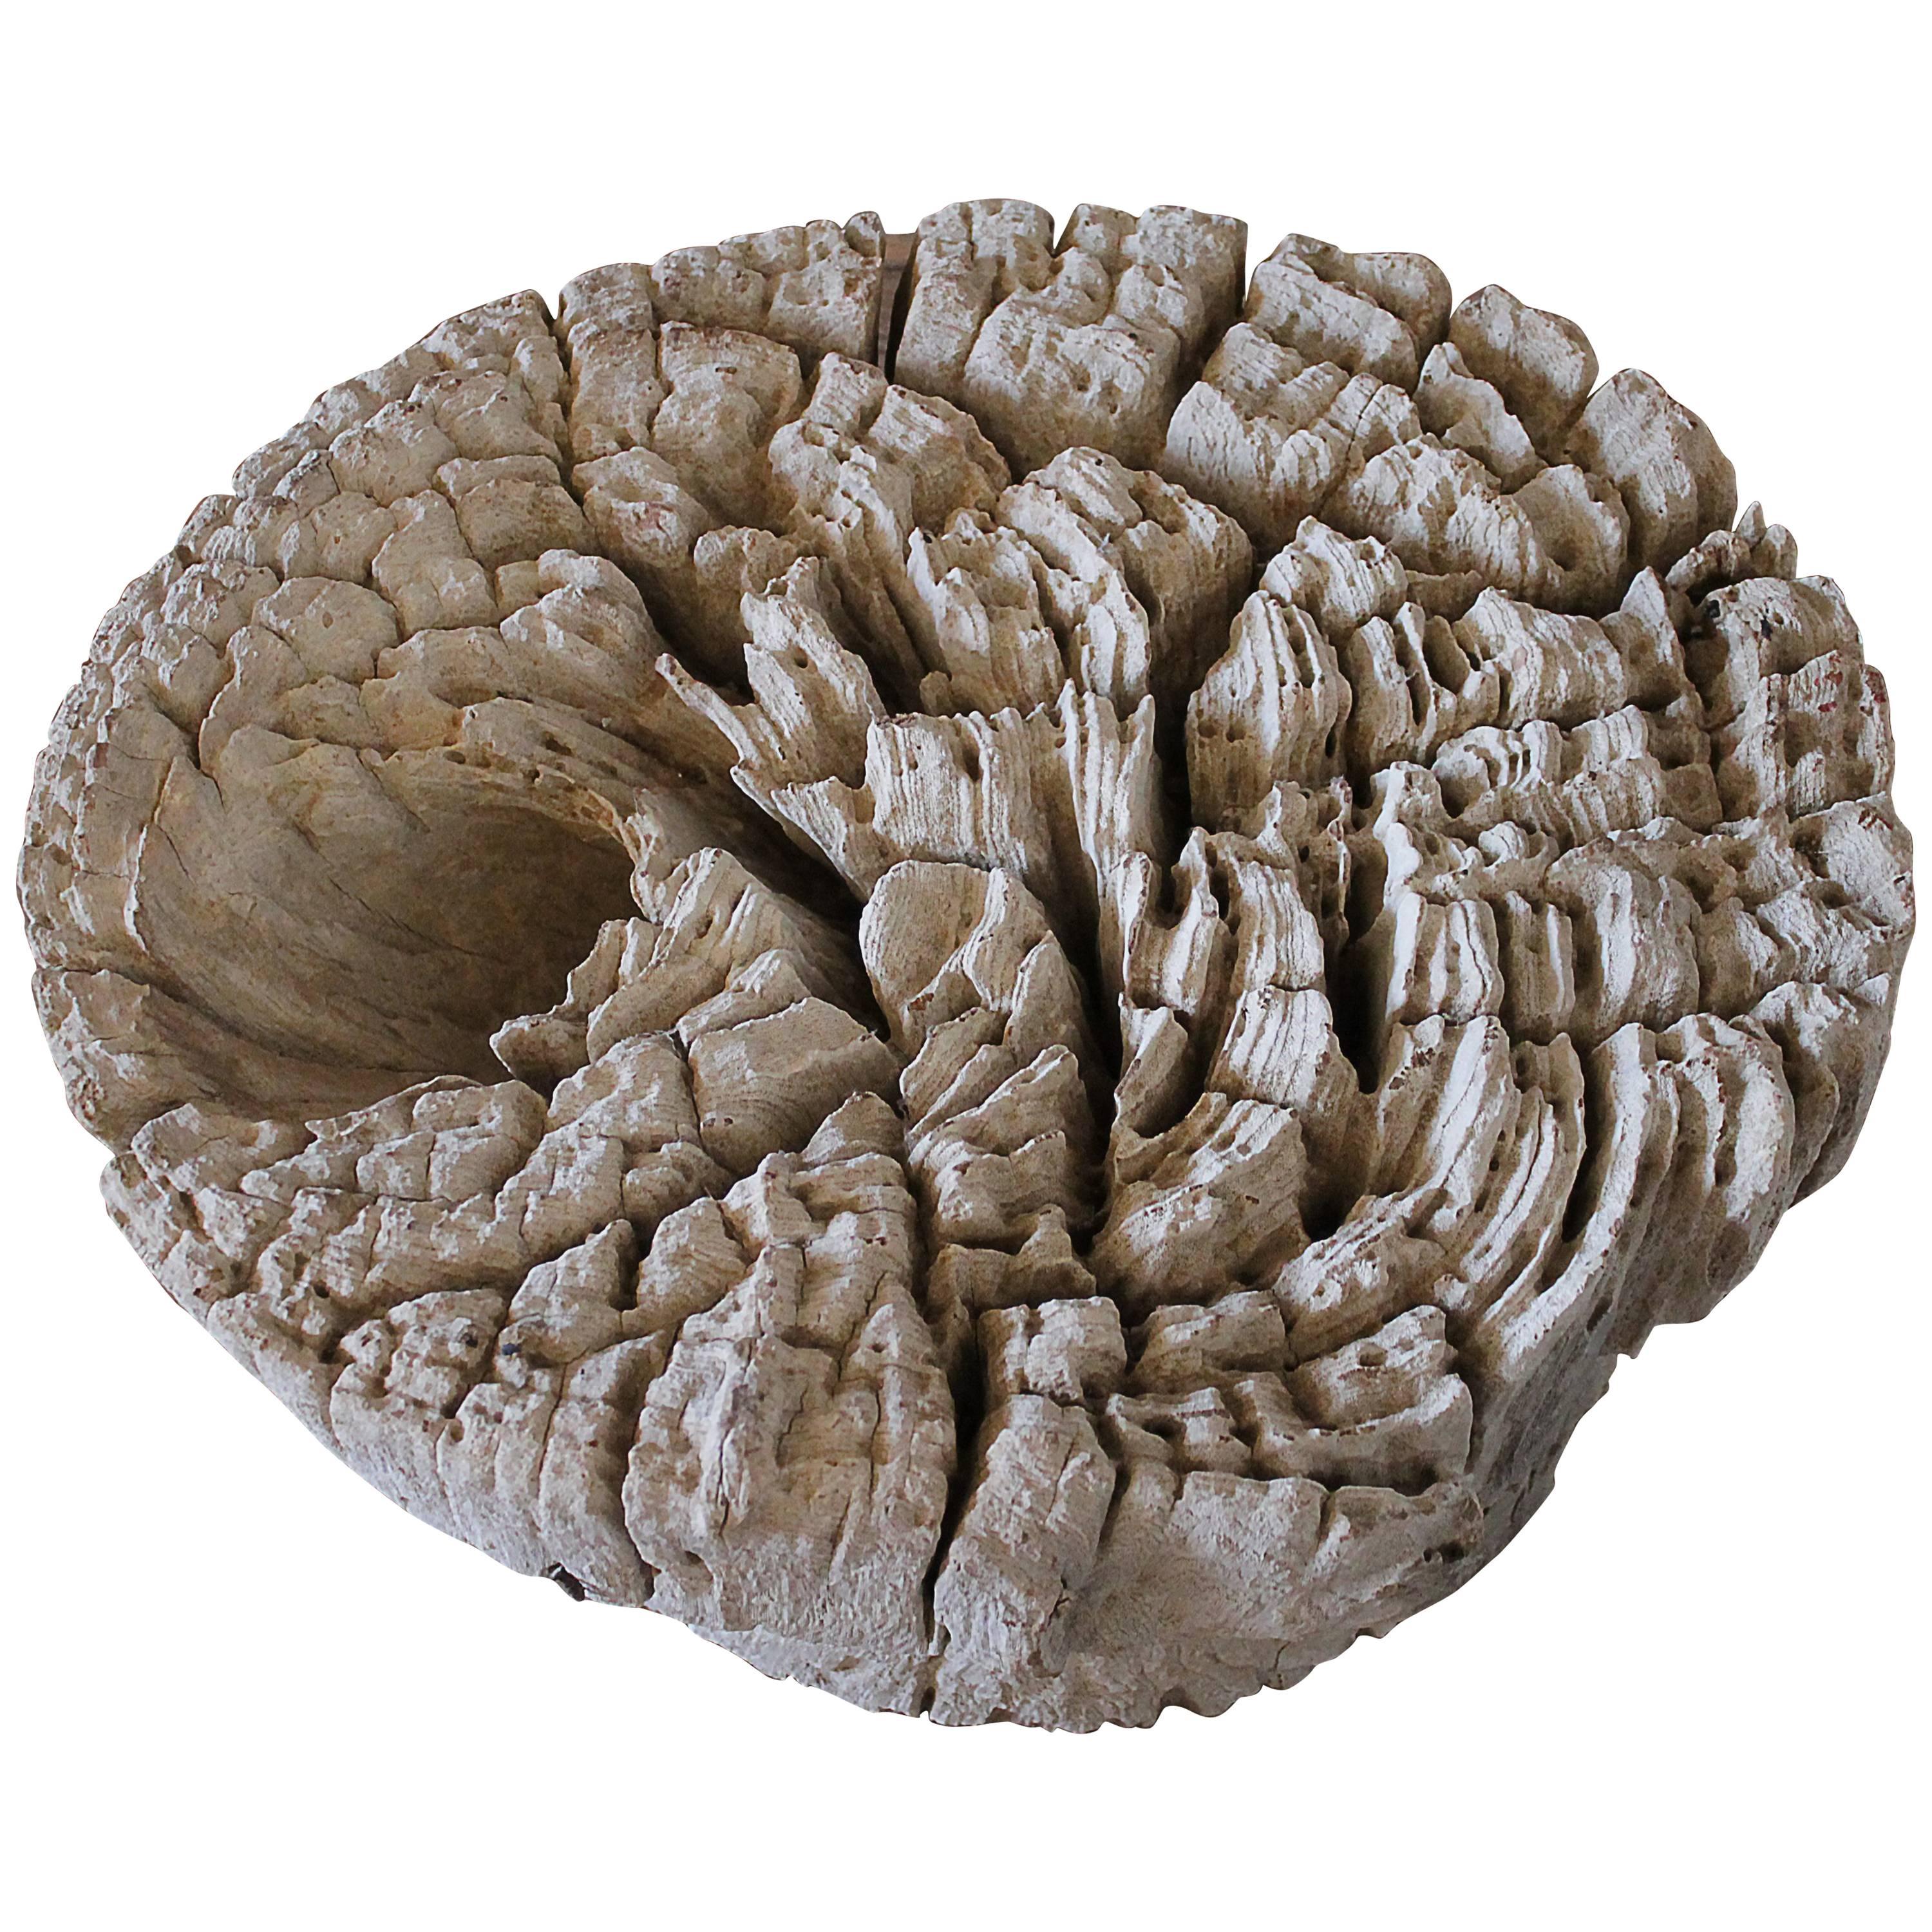 Carved Petrified Wall Art or Centrepiece